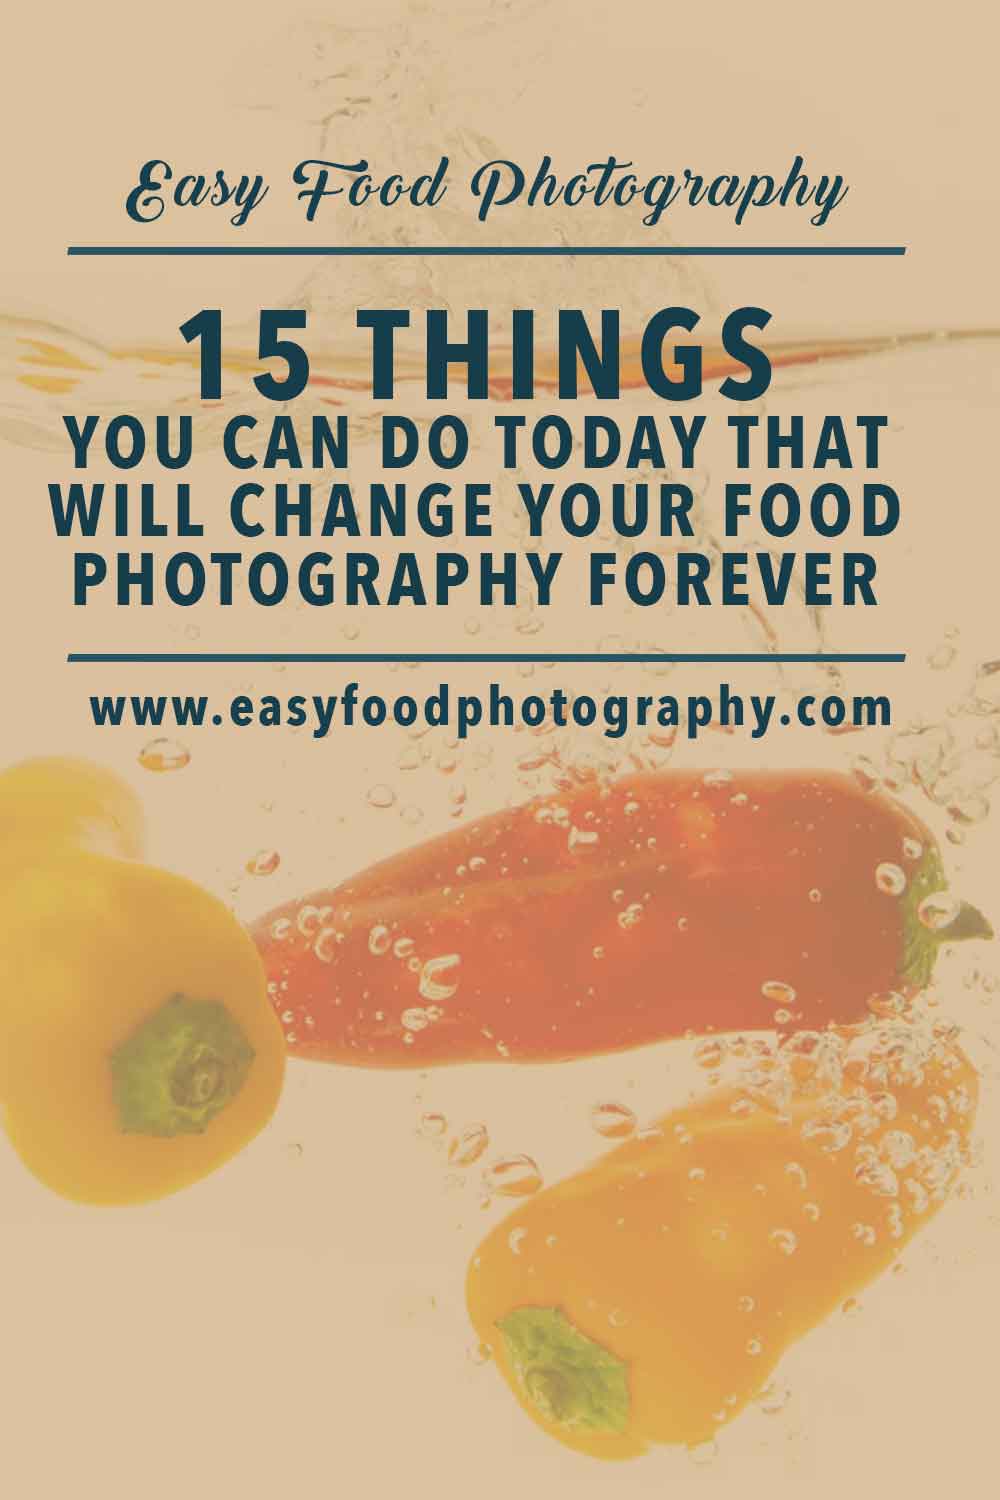 15 THINGS YOU CAN DO TODAY WHICH WILL CHANGE YOUR FOOD PHOTOGRAPHY FOREVER